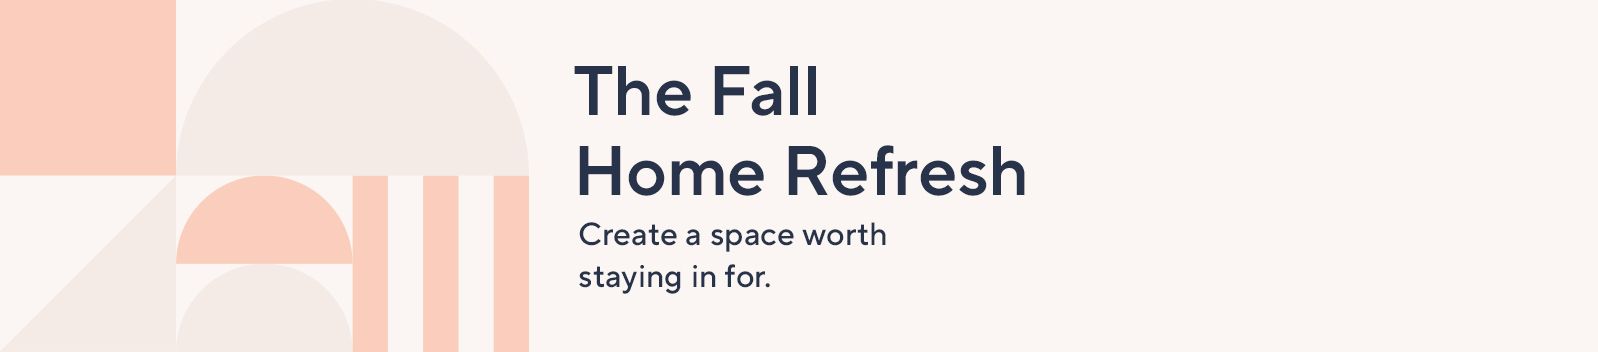 The Fall Home Refresh. Create a space worth staying in for.